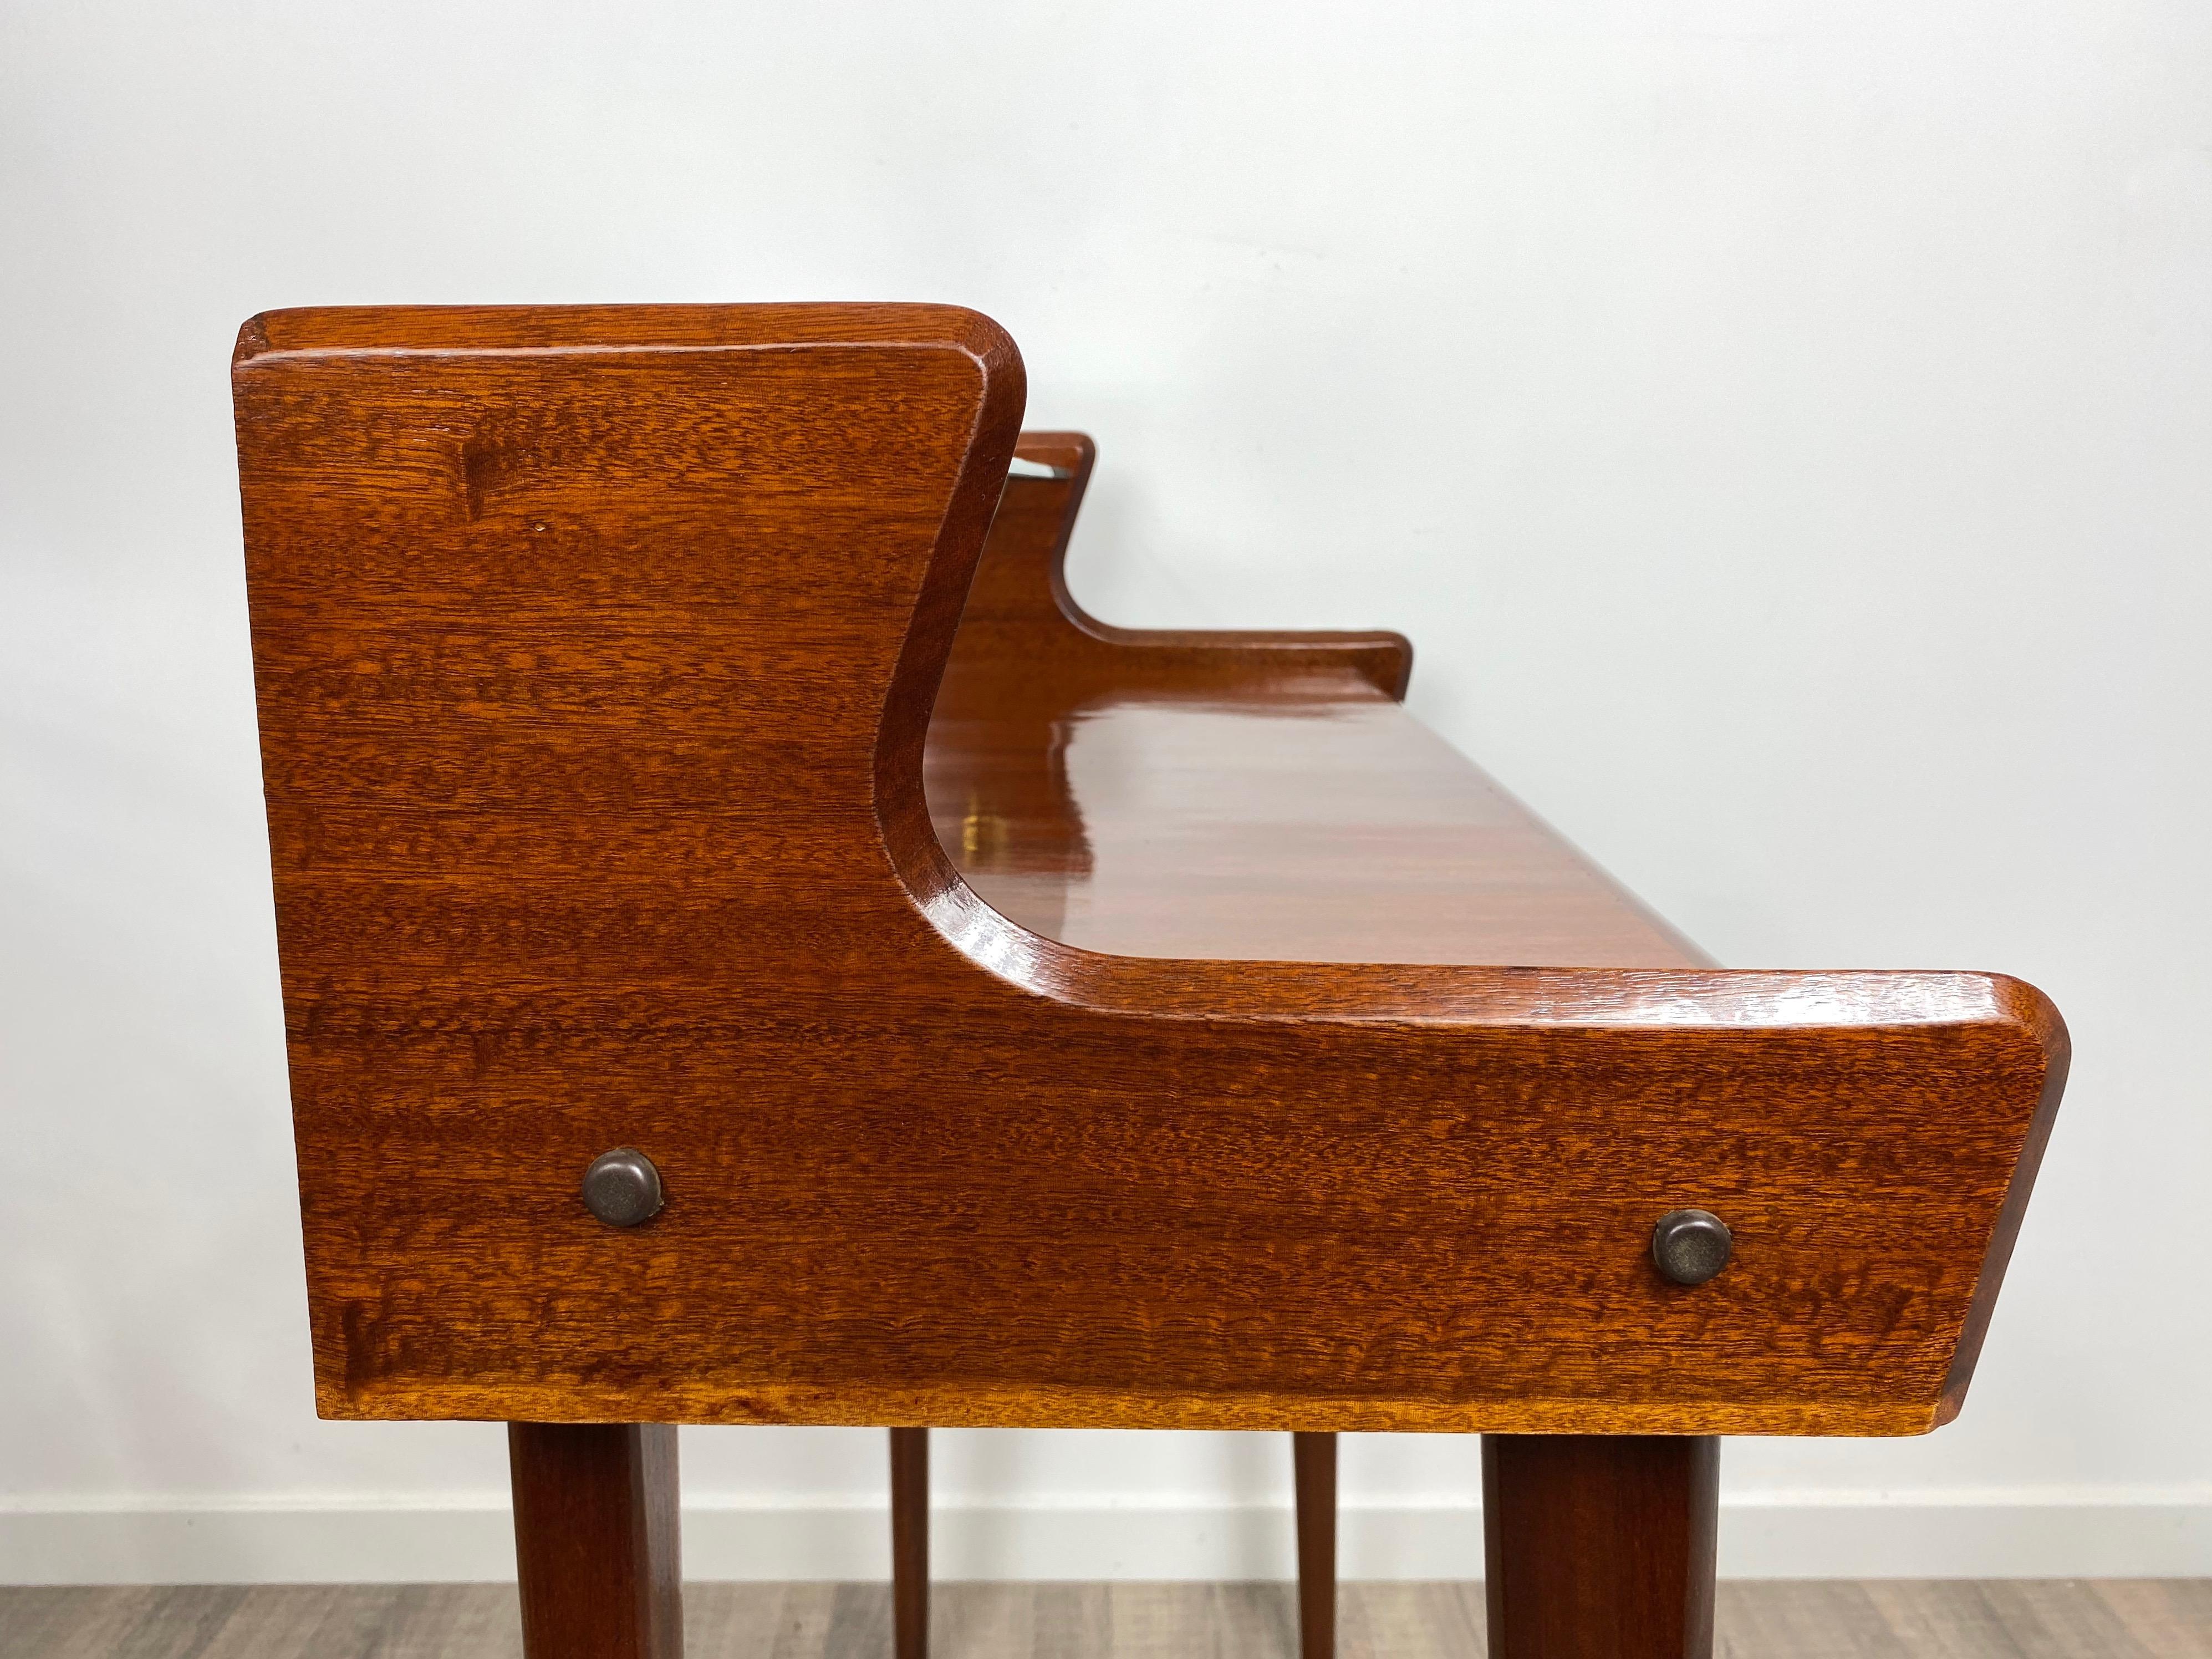 Italian Midcentury Mahogany Wood and Glass Console Table by Carlo de Carli 1950s For Sale 4